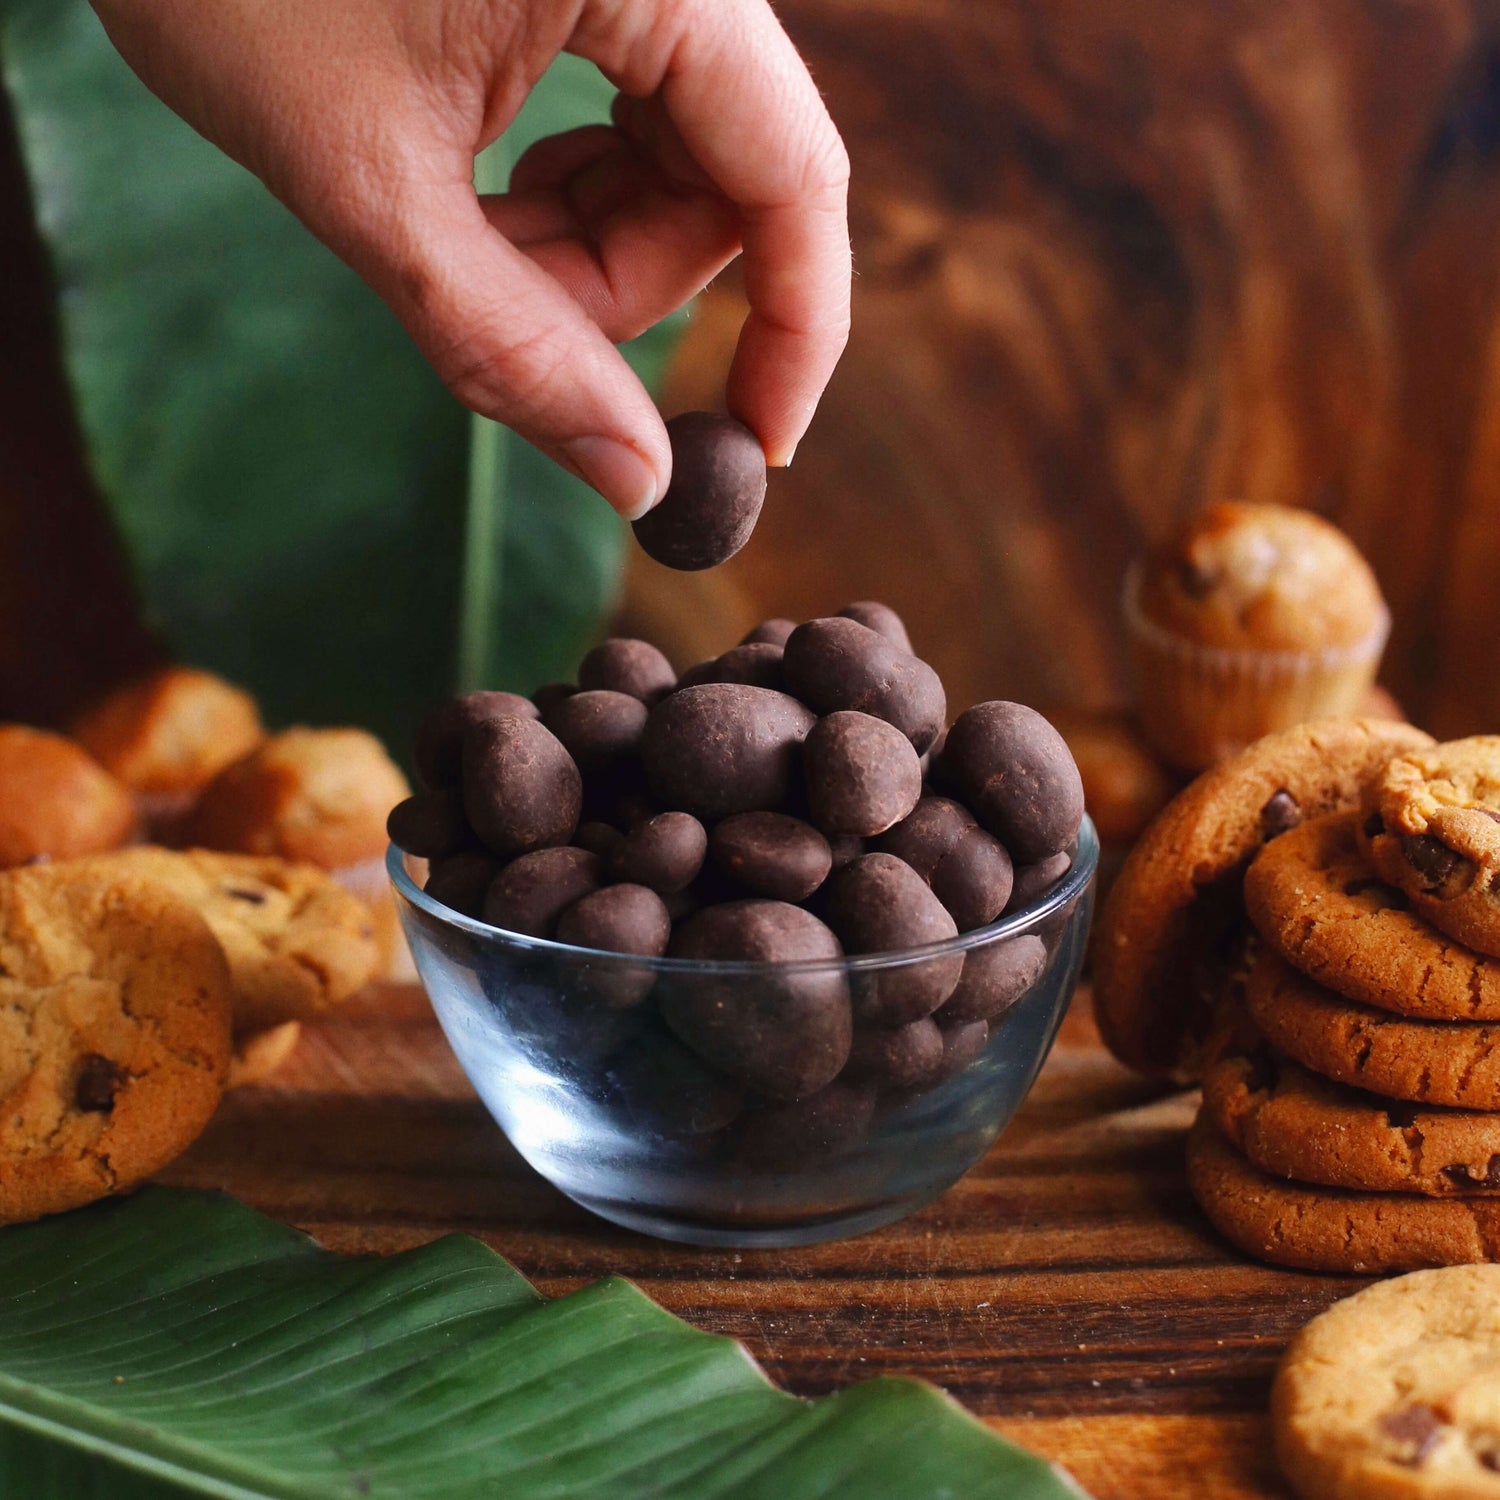 Image of person picking up coconut chocolate macadamia from bowl